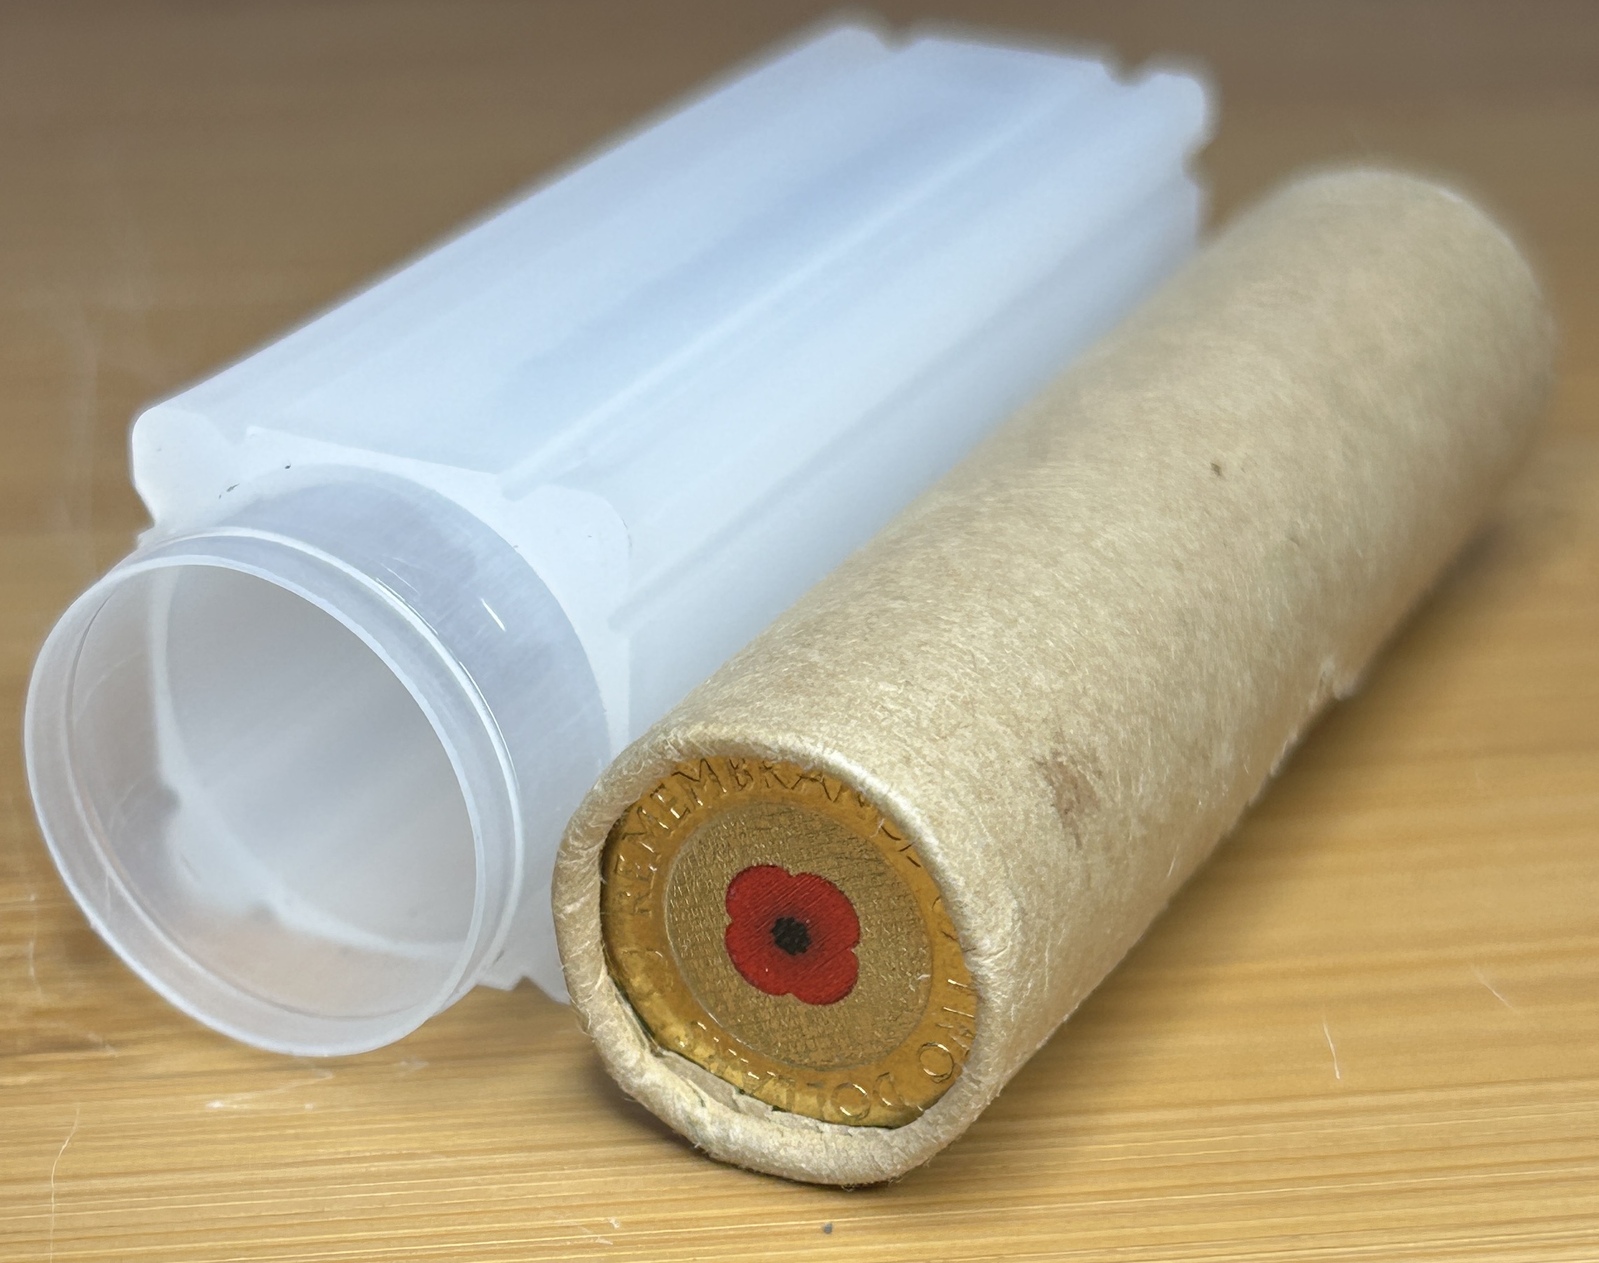 2012 $2 Red Poppy Roll - 25 coins